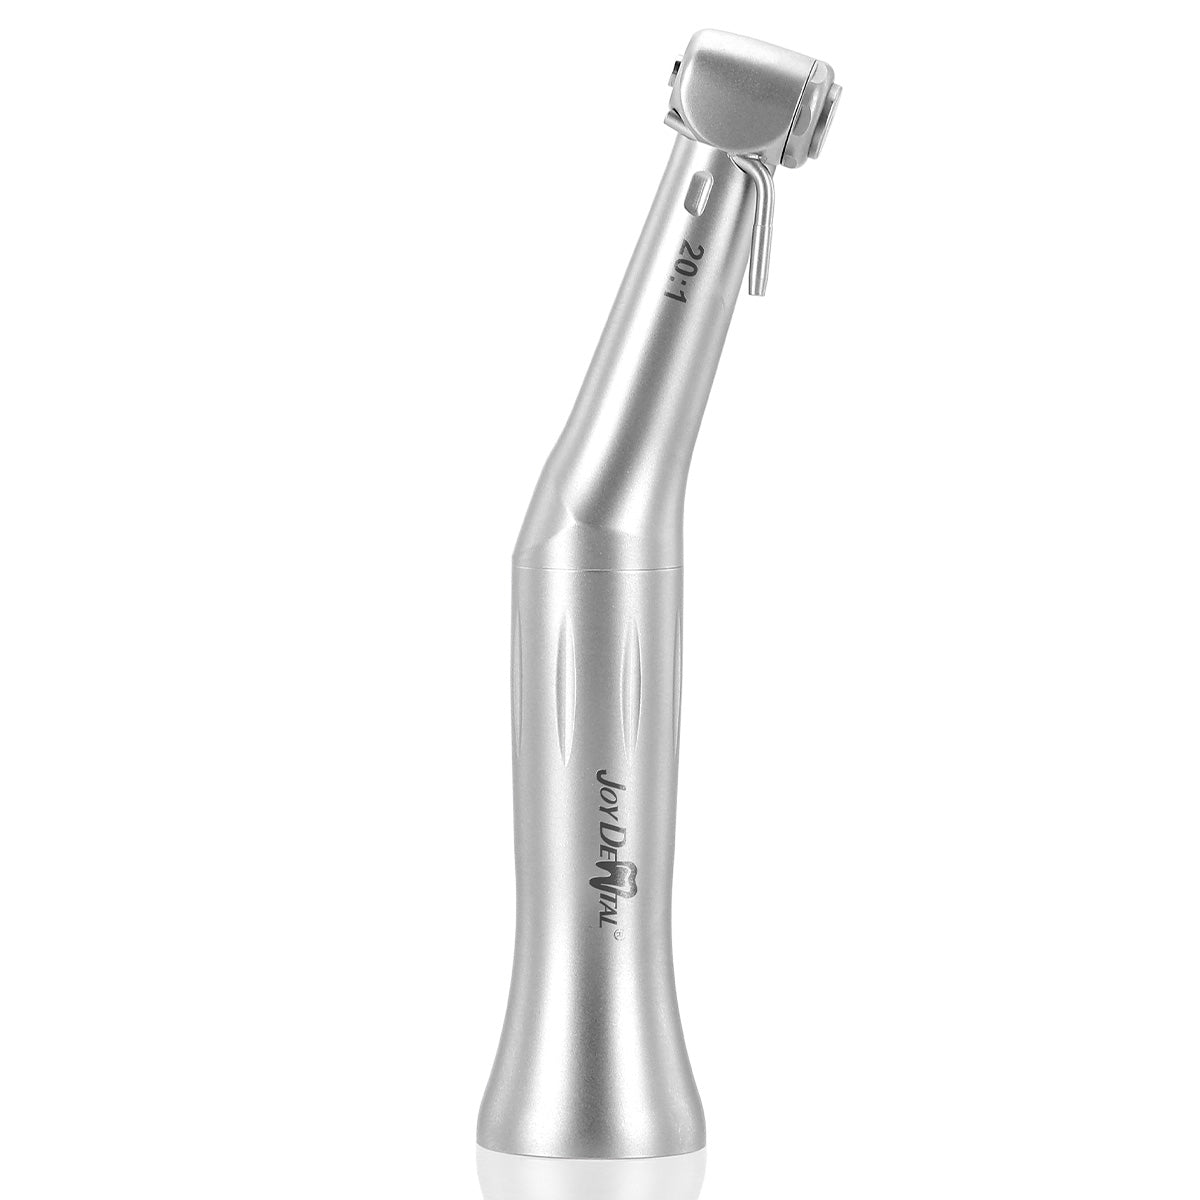 20:1 Implant Reduction Contra Angle Handpiece Push Button External Spray - pairaydental.com